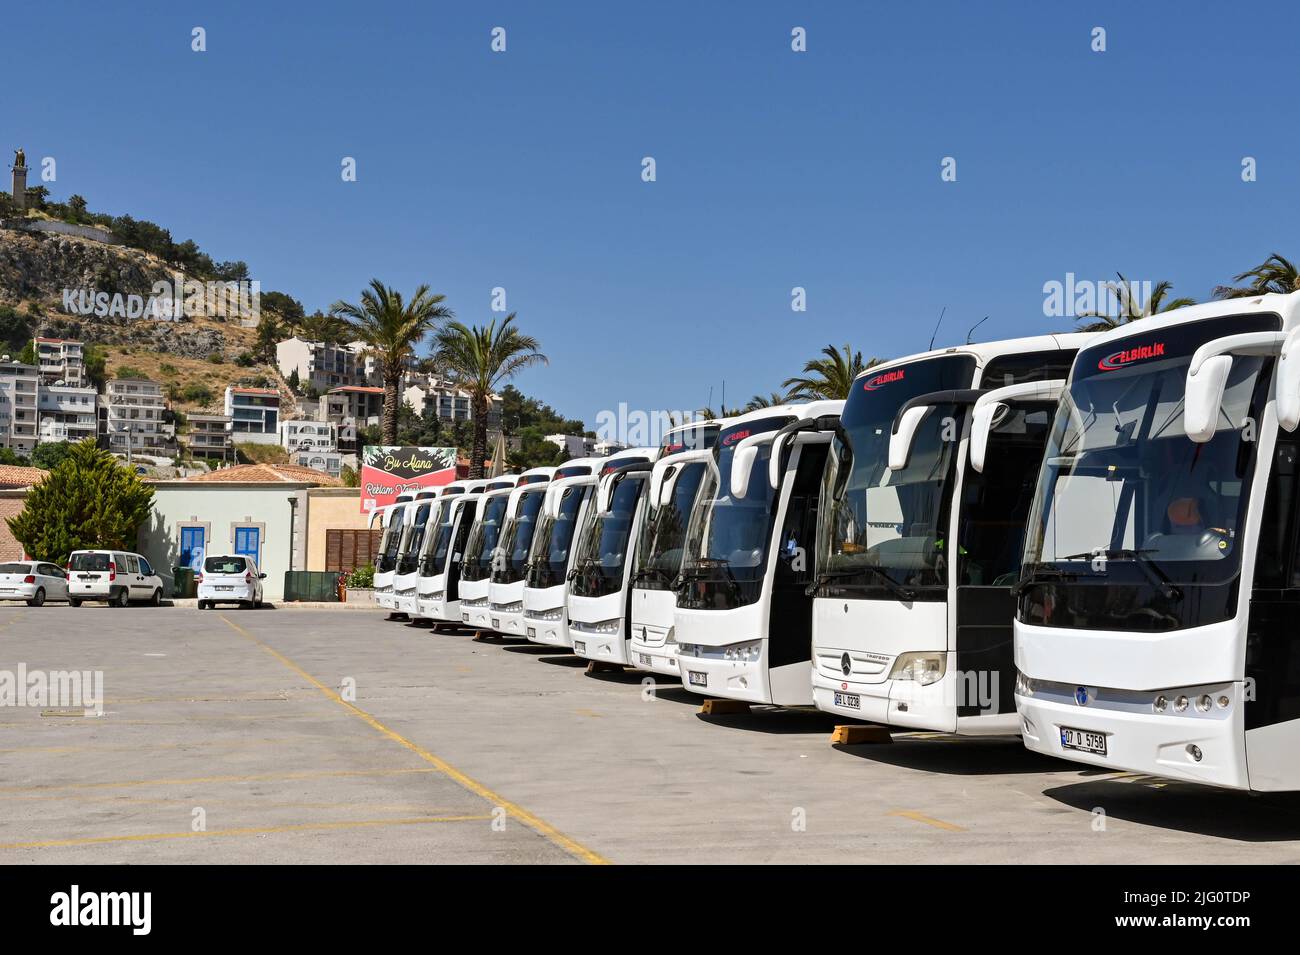 Kusadasi, Turkey - June May 2022: Row of motor coaches waiting for passengers from a cruise ship. In the background is a sign on the hill Stock Photo